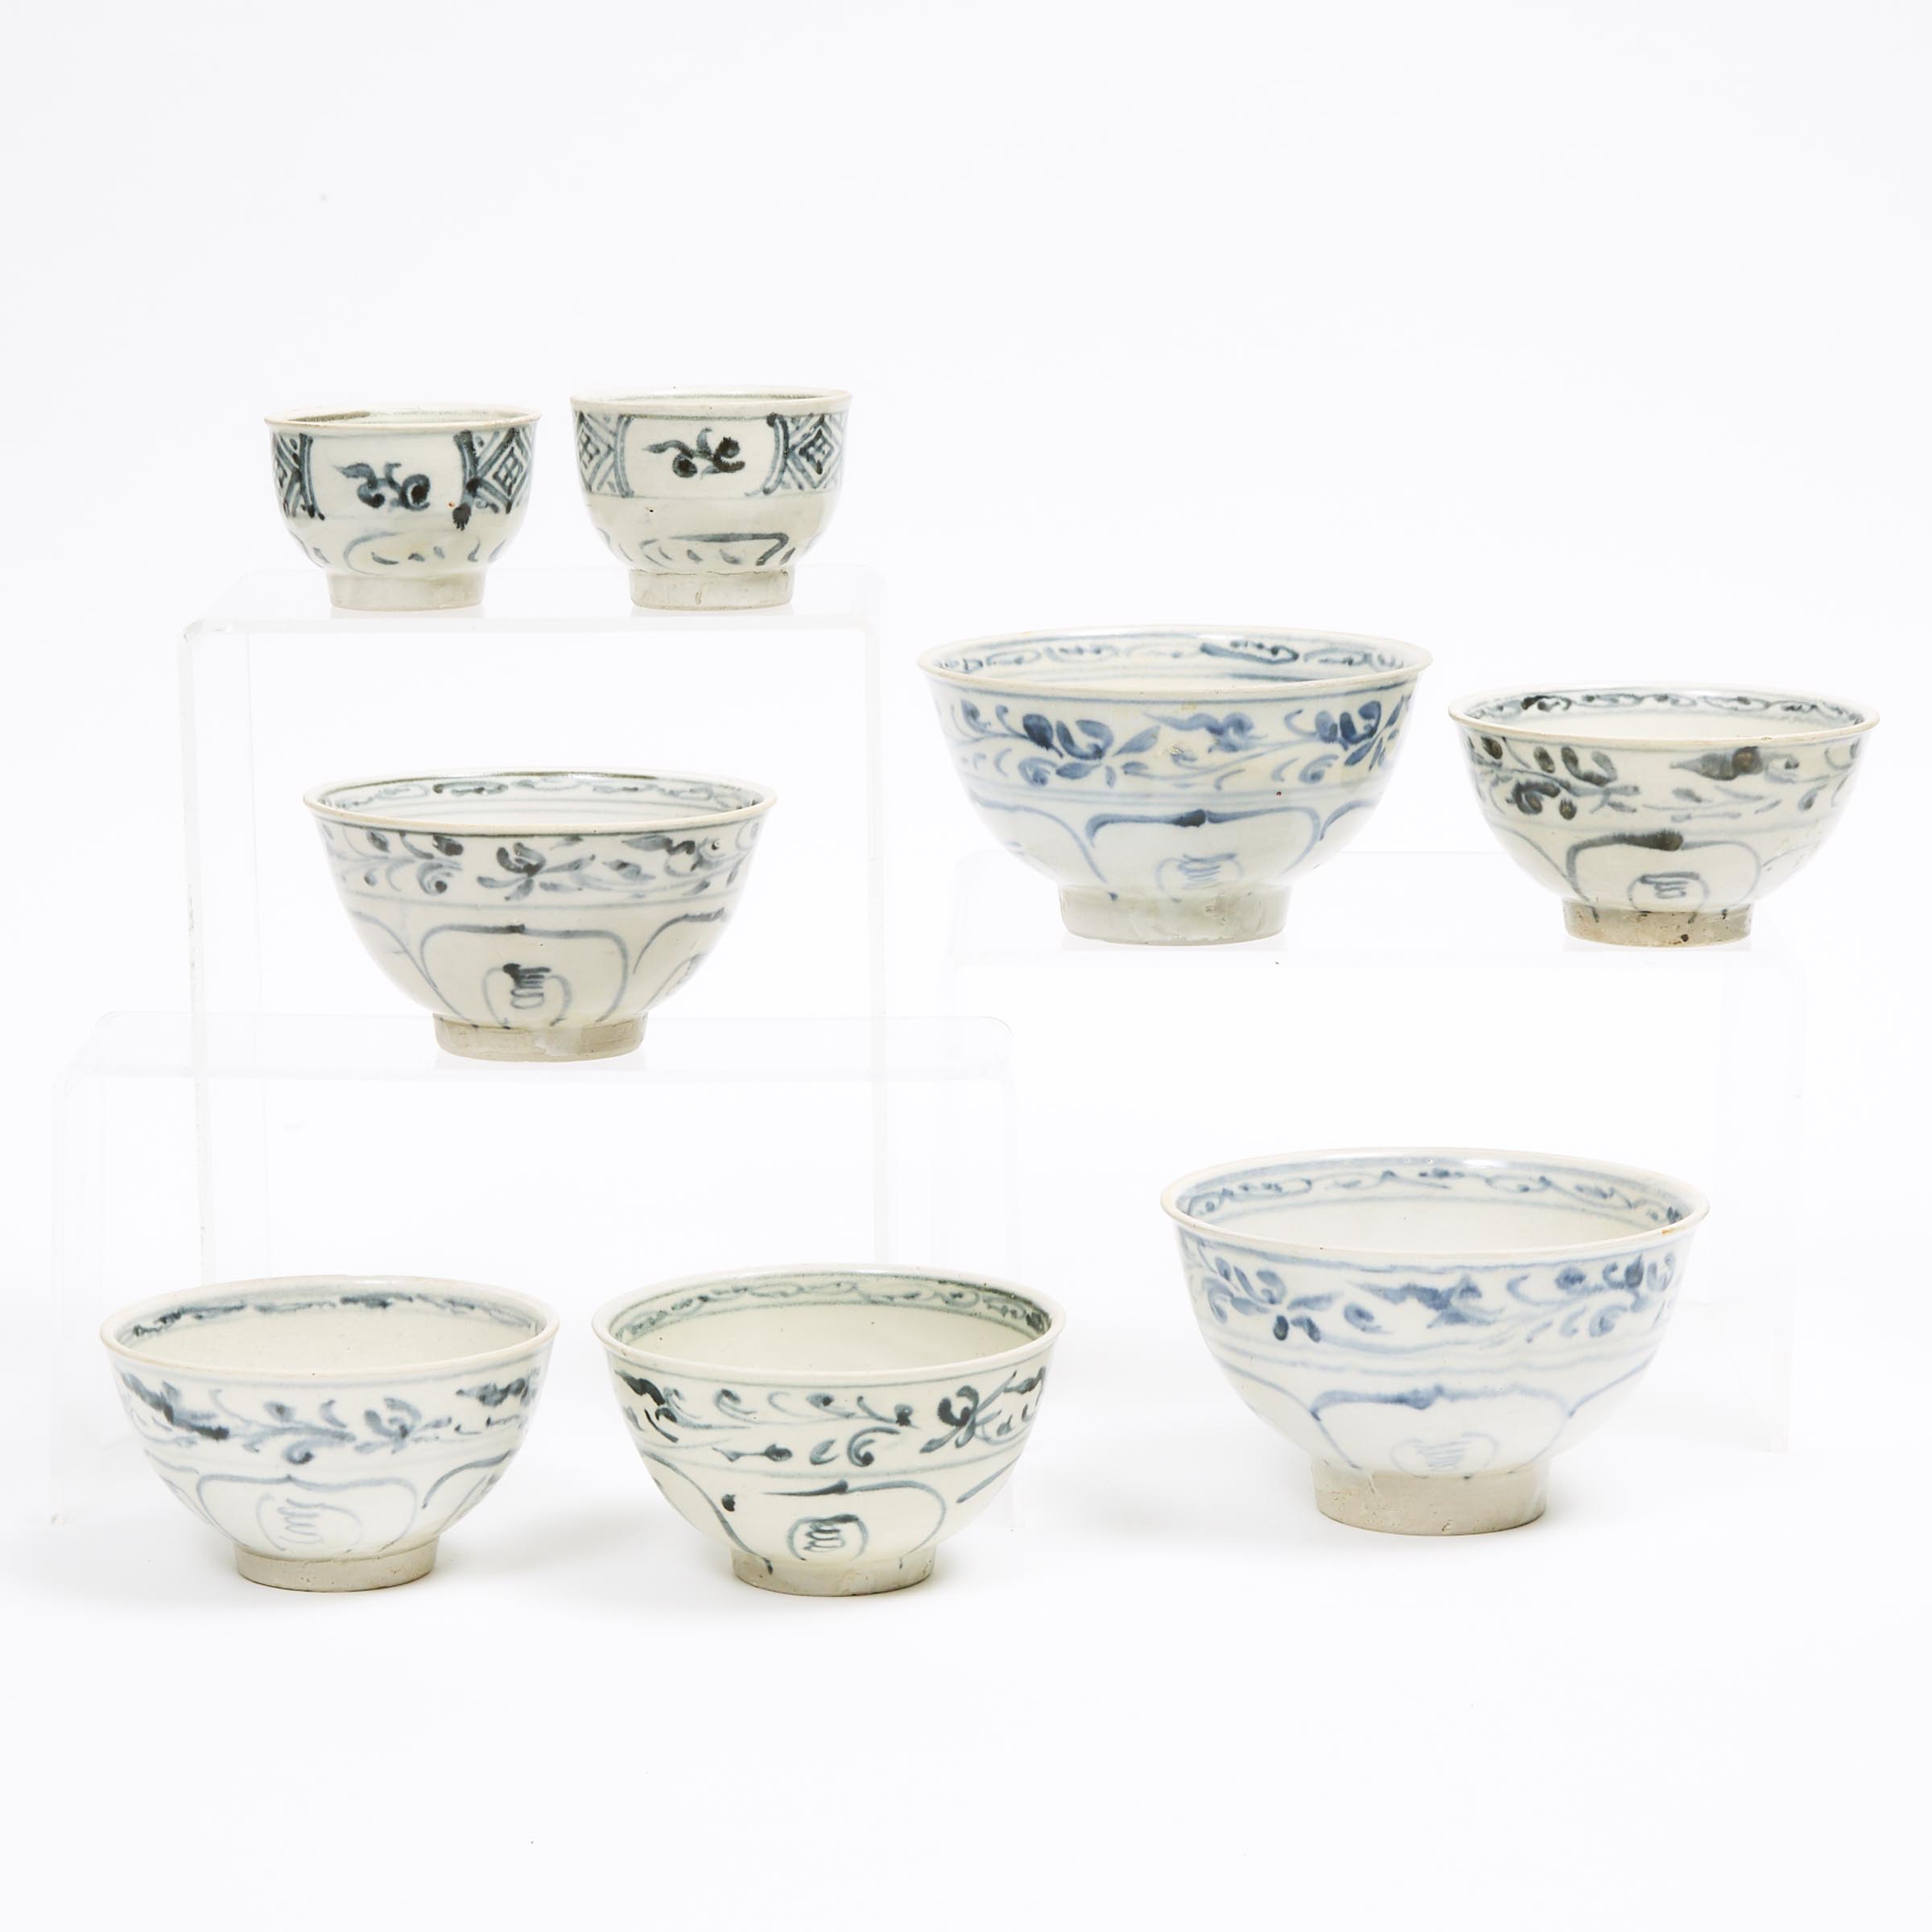 A Group of Eight 'Hoi An Hoard' Vietnamese Blue and White Bowls and Cups, 15th Century